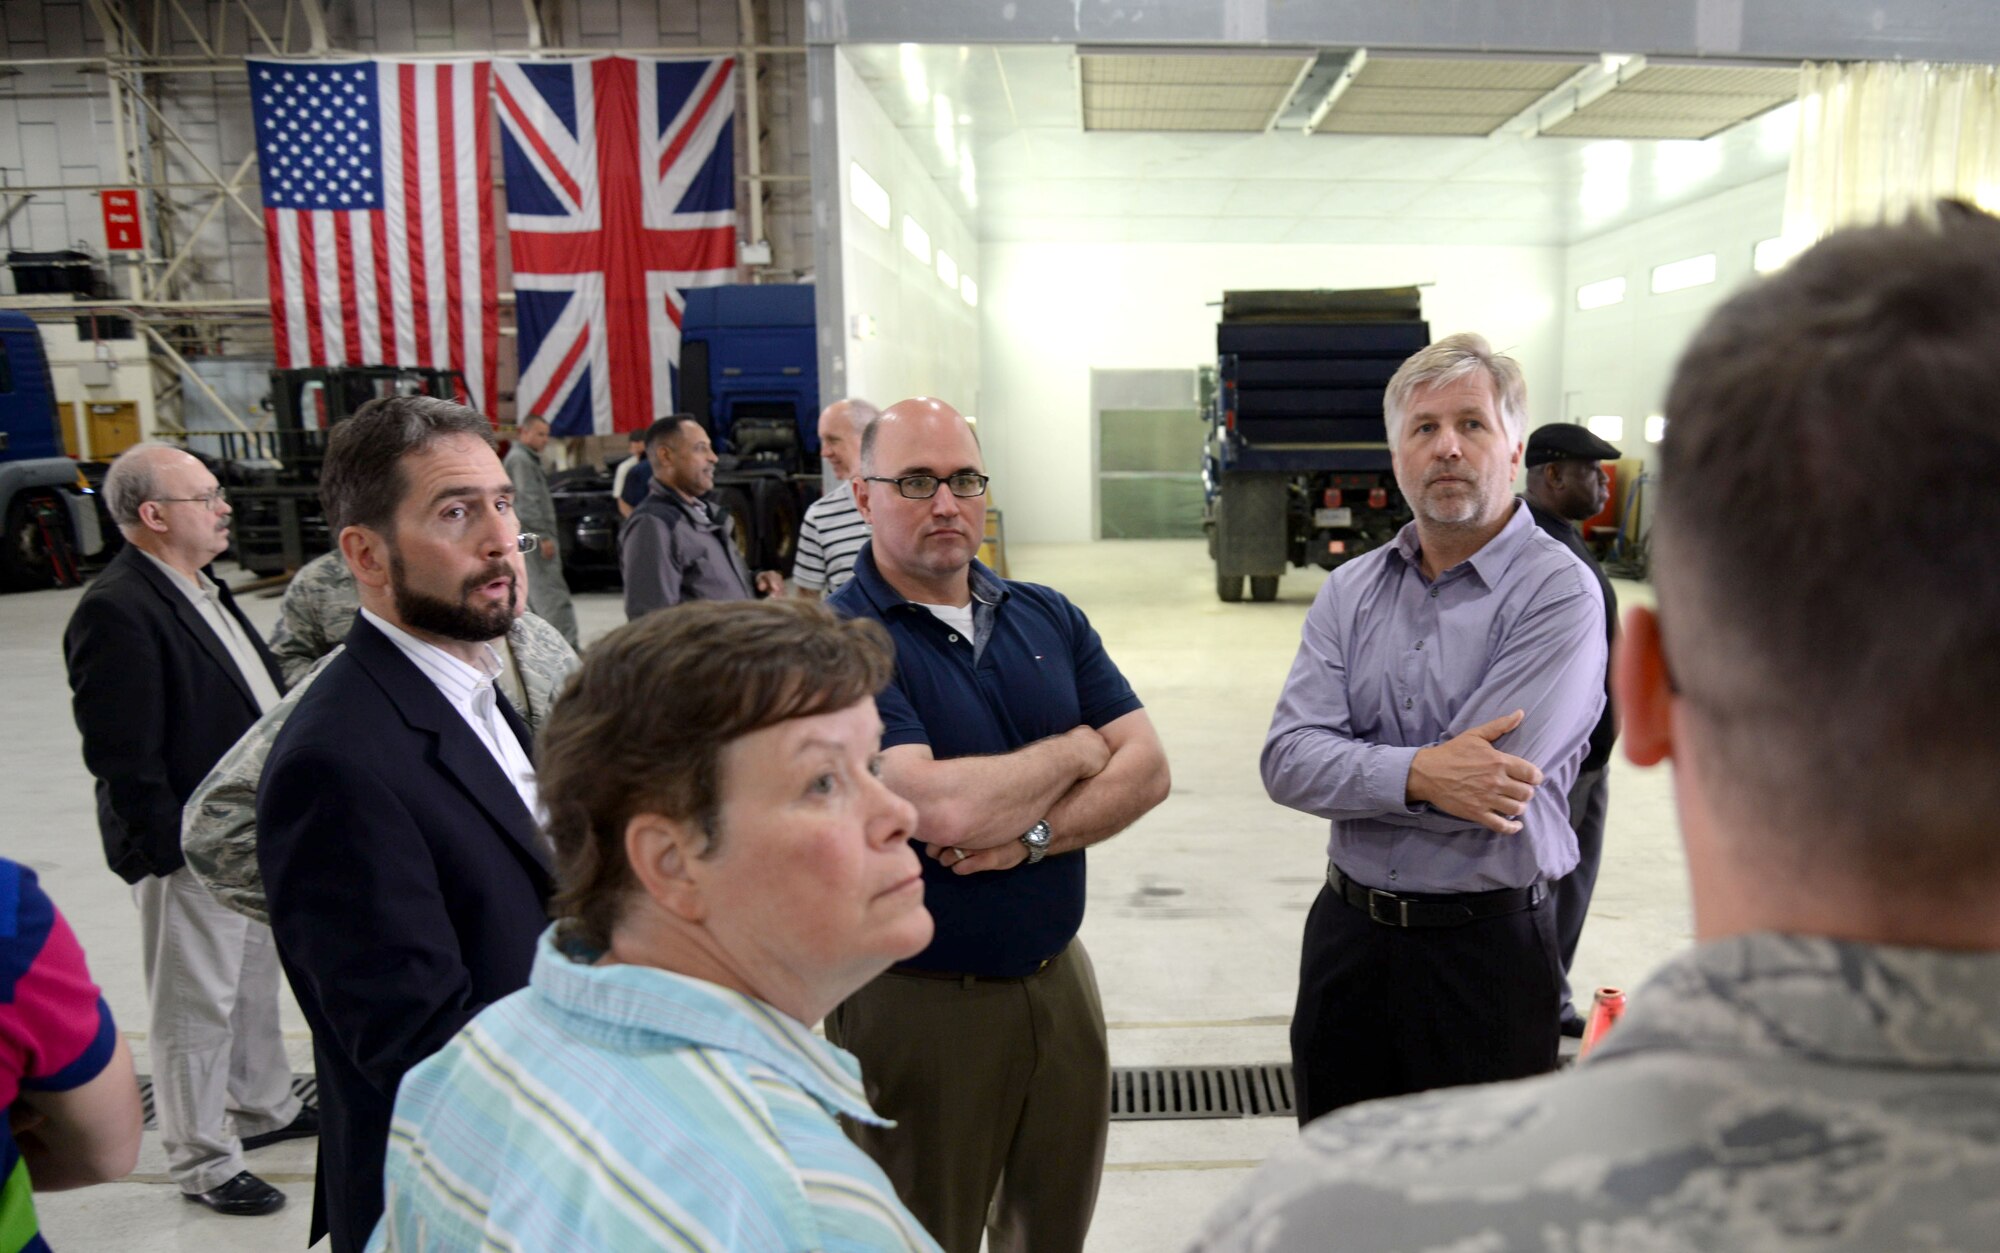 Members of various U.S. and U.K. organizations supporting RAF Mildenhall complete a Chemical Weapons Convention Challenge Inspection Exercise June 29, 2015, by testing an exit control point on RAF Mildenhall. RAF Mildenhall was chosen for a challenge inspection testing compliance with the CWC. The base is expected to demonstrate compliance by providing the inspection team access to all requested areas and suggesting facilities that should be inspected. (U.S. Air Force photo by Staff. Sgt. Kate Thornton/Released)